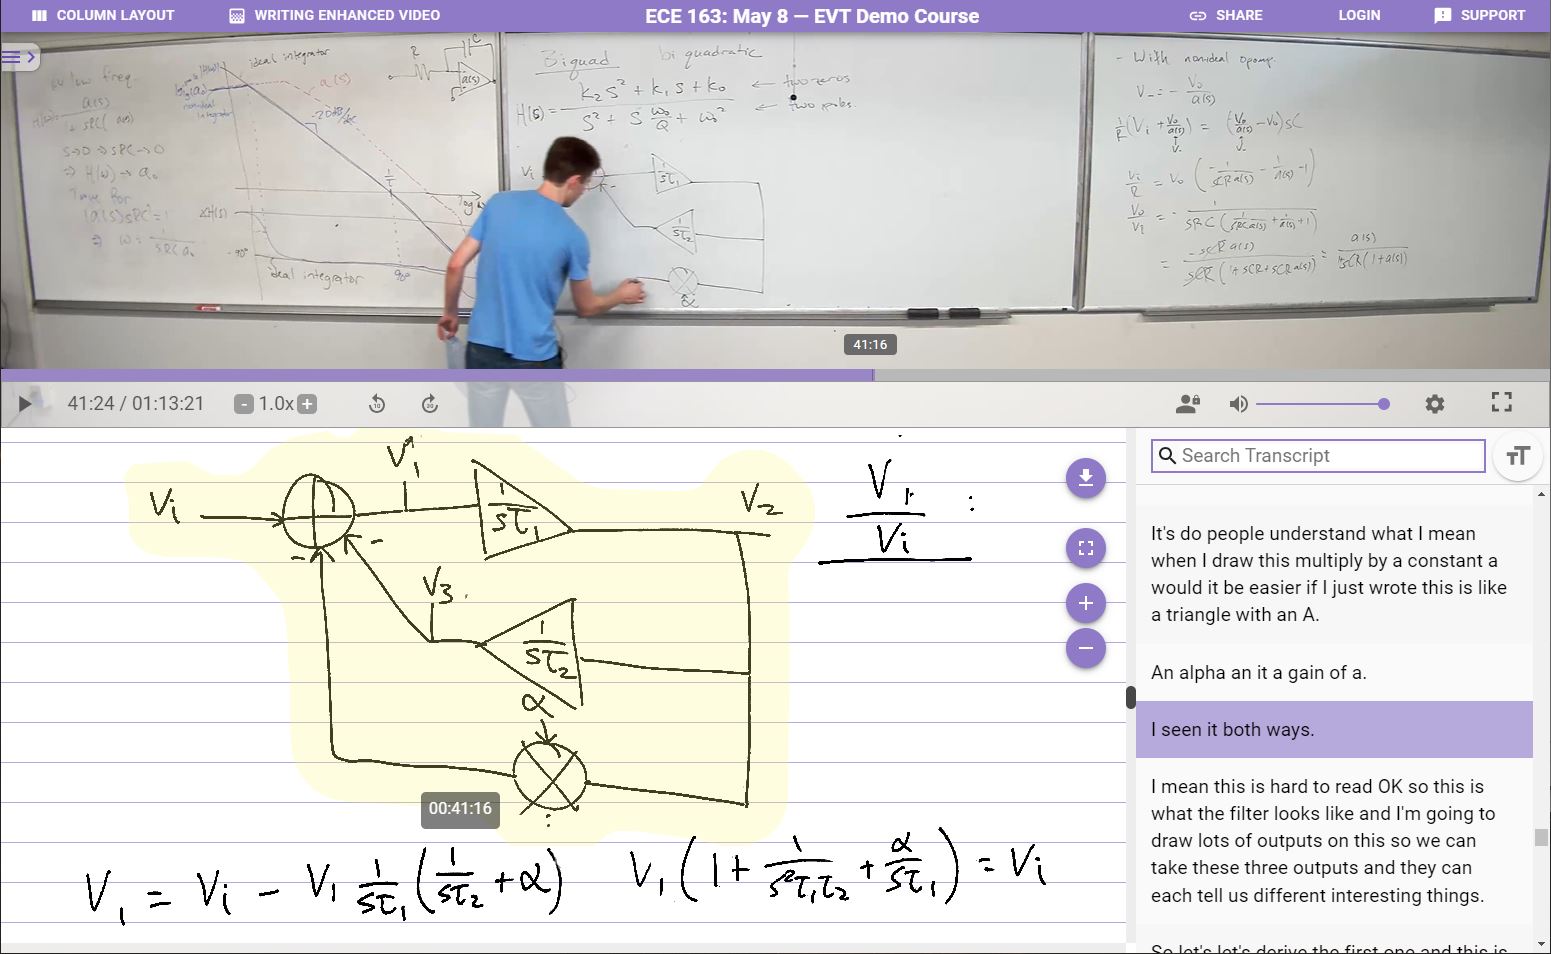 screenshot of the evt web platform, showing a electrical engineering class taught on a whiteboard.